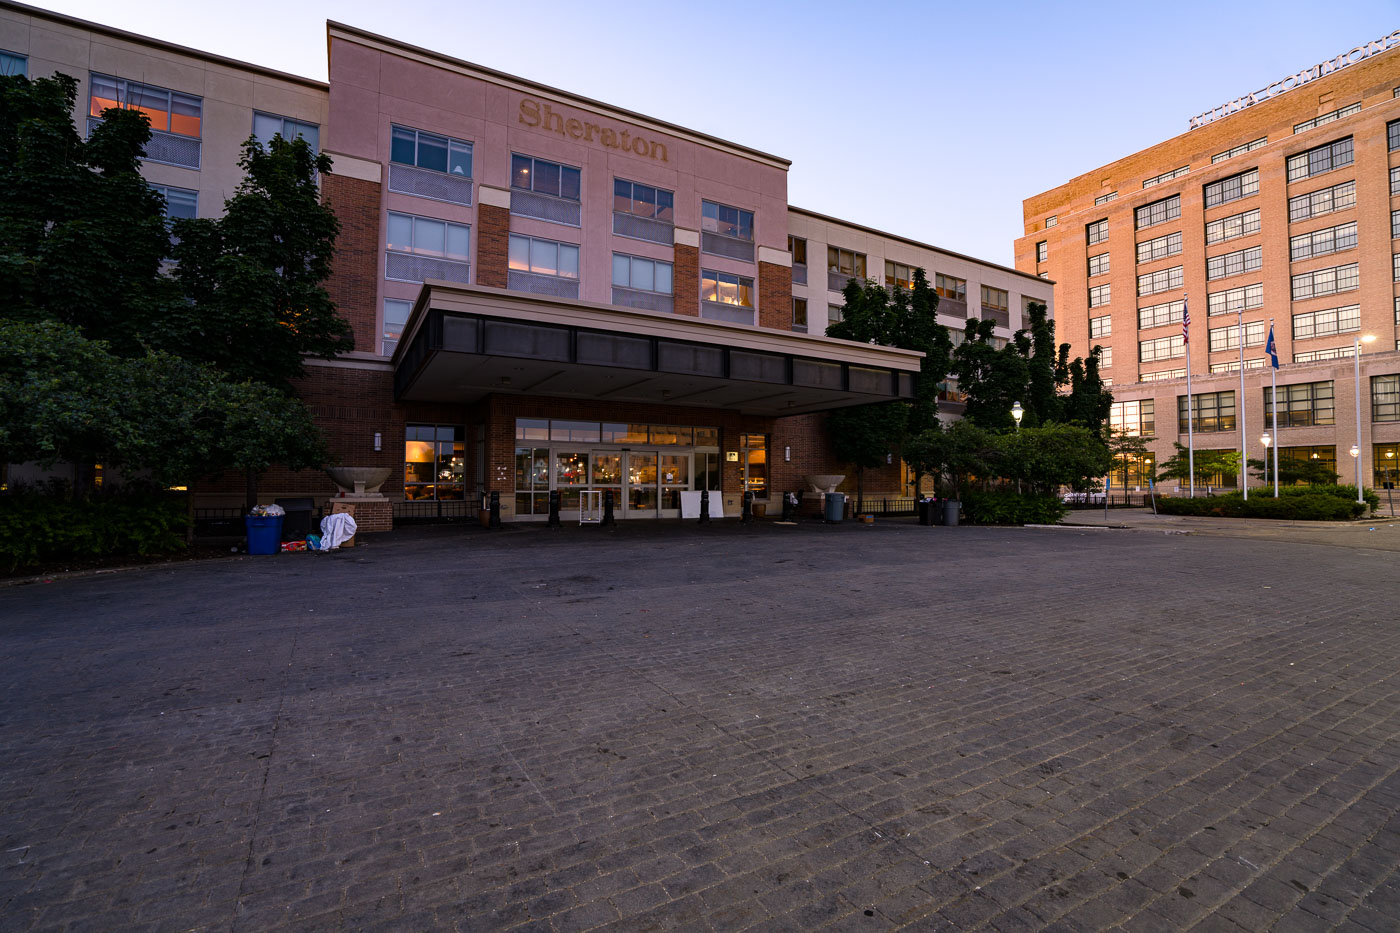 Wide angle photo of the former Sheraton Hotel in Minneapolis